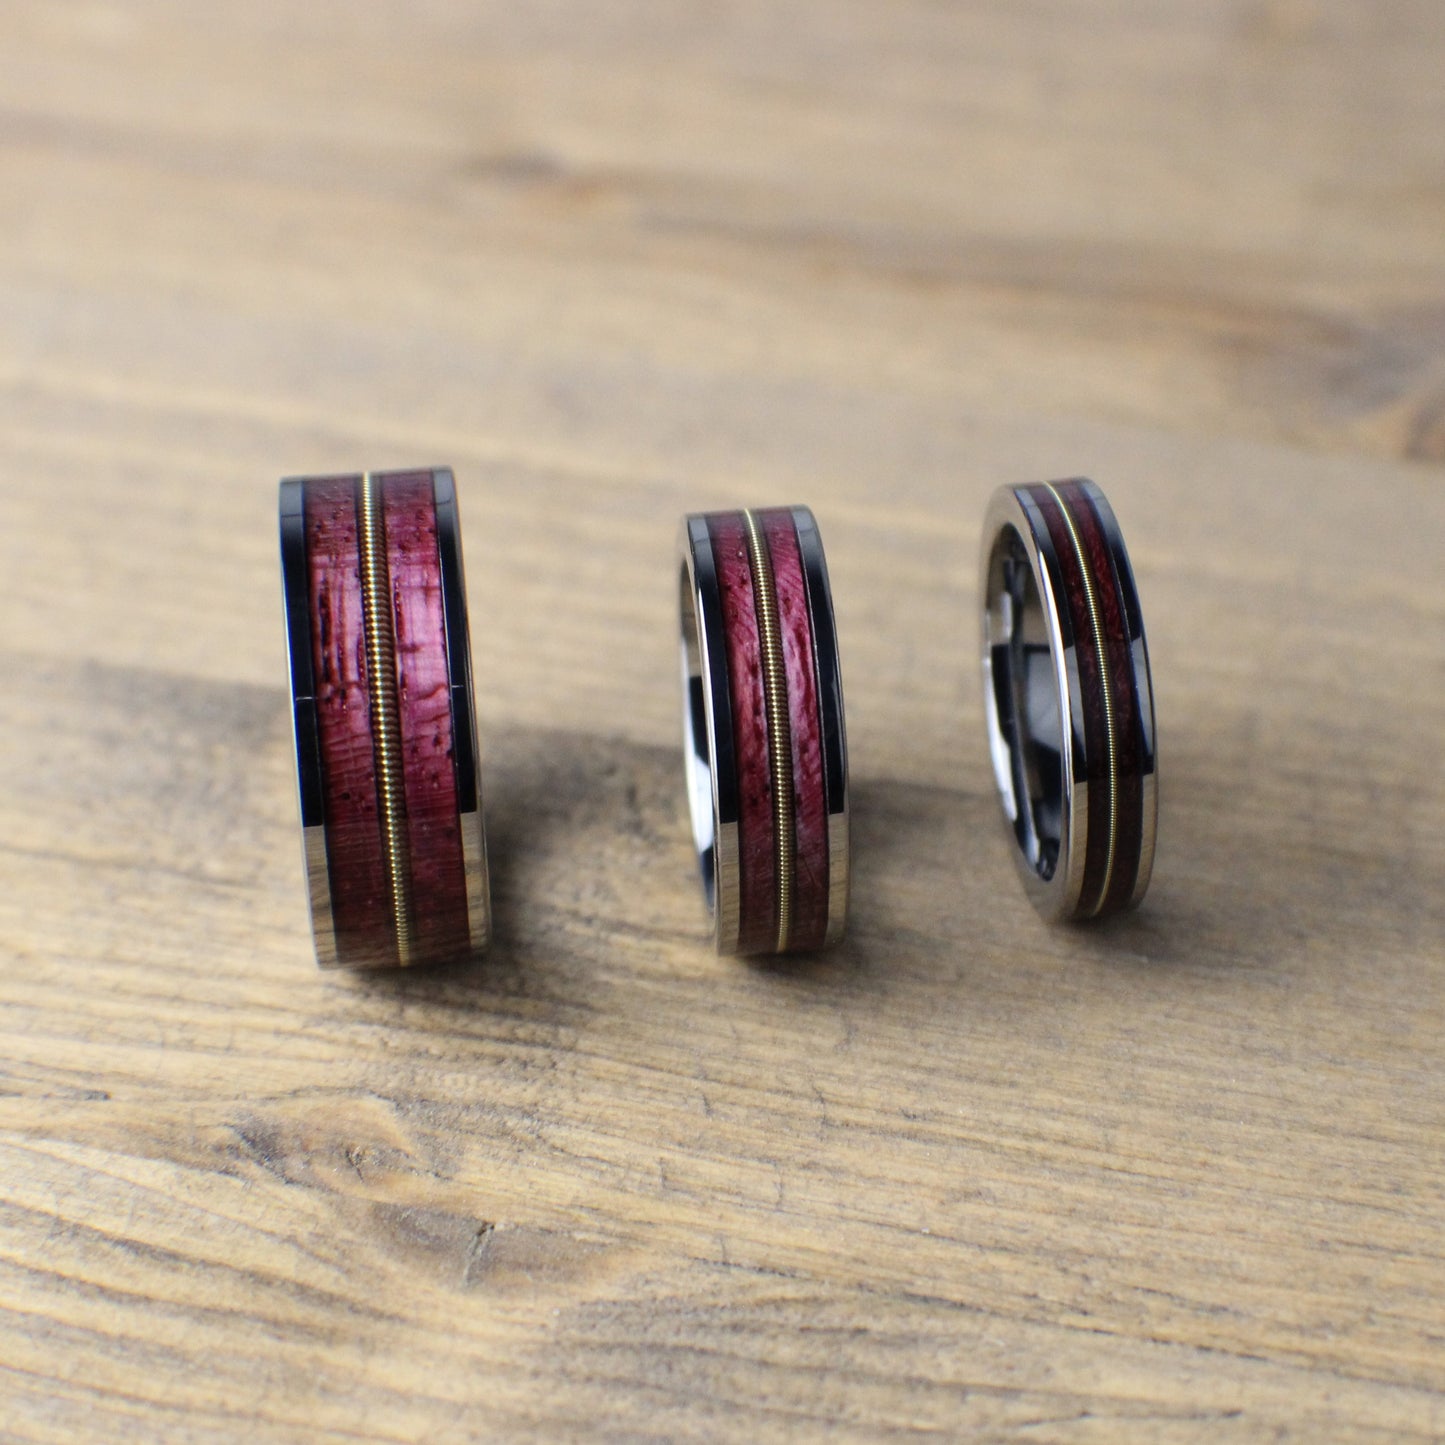 Guitar string rings in sizes 8mm, 6mm, and 4mm